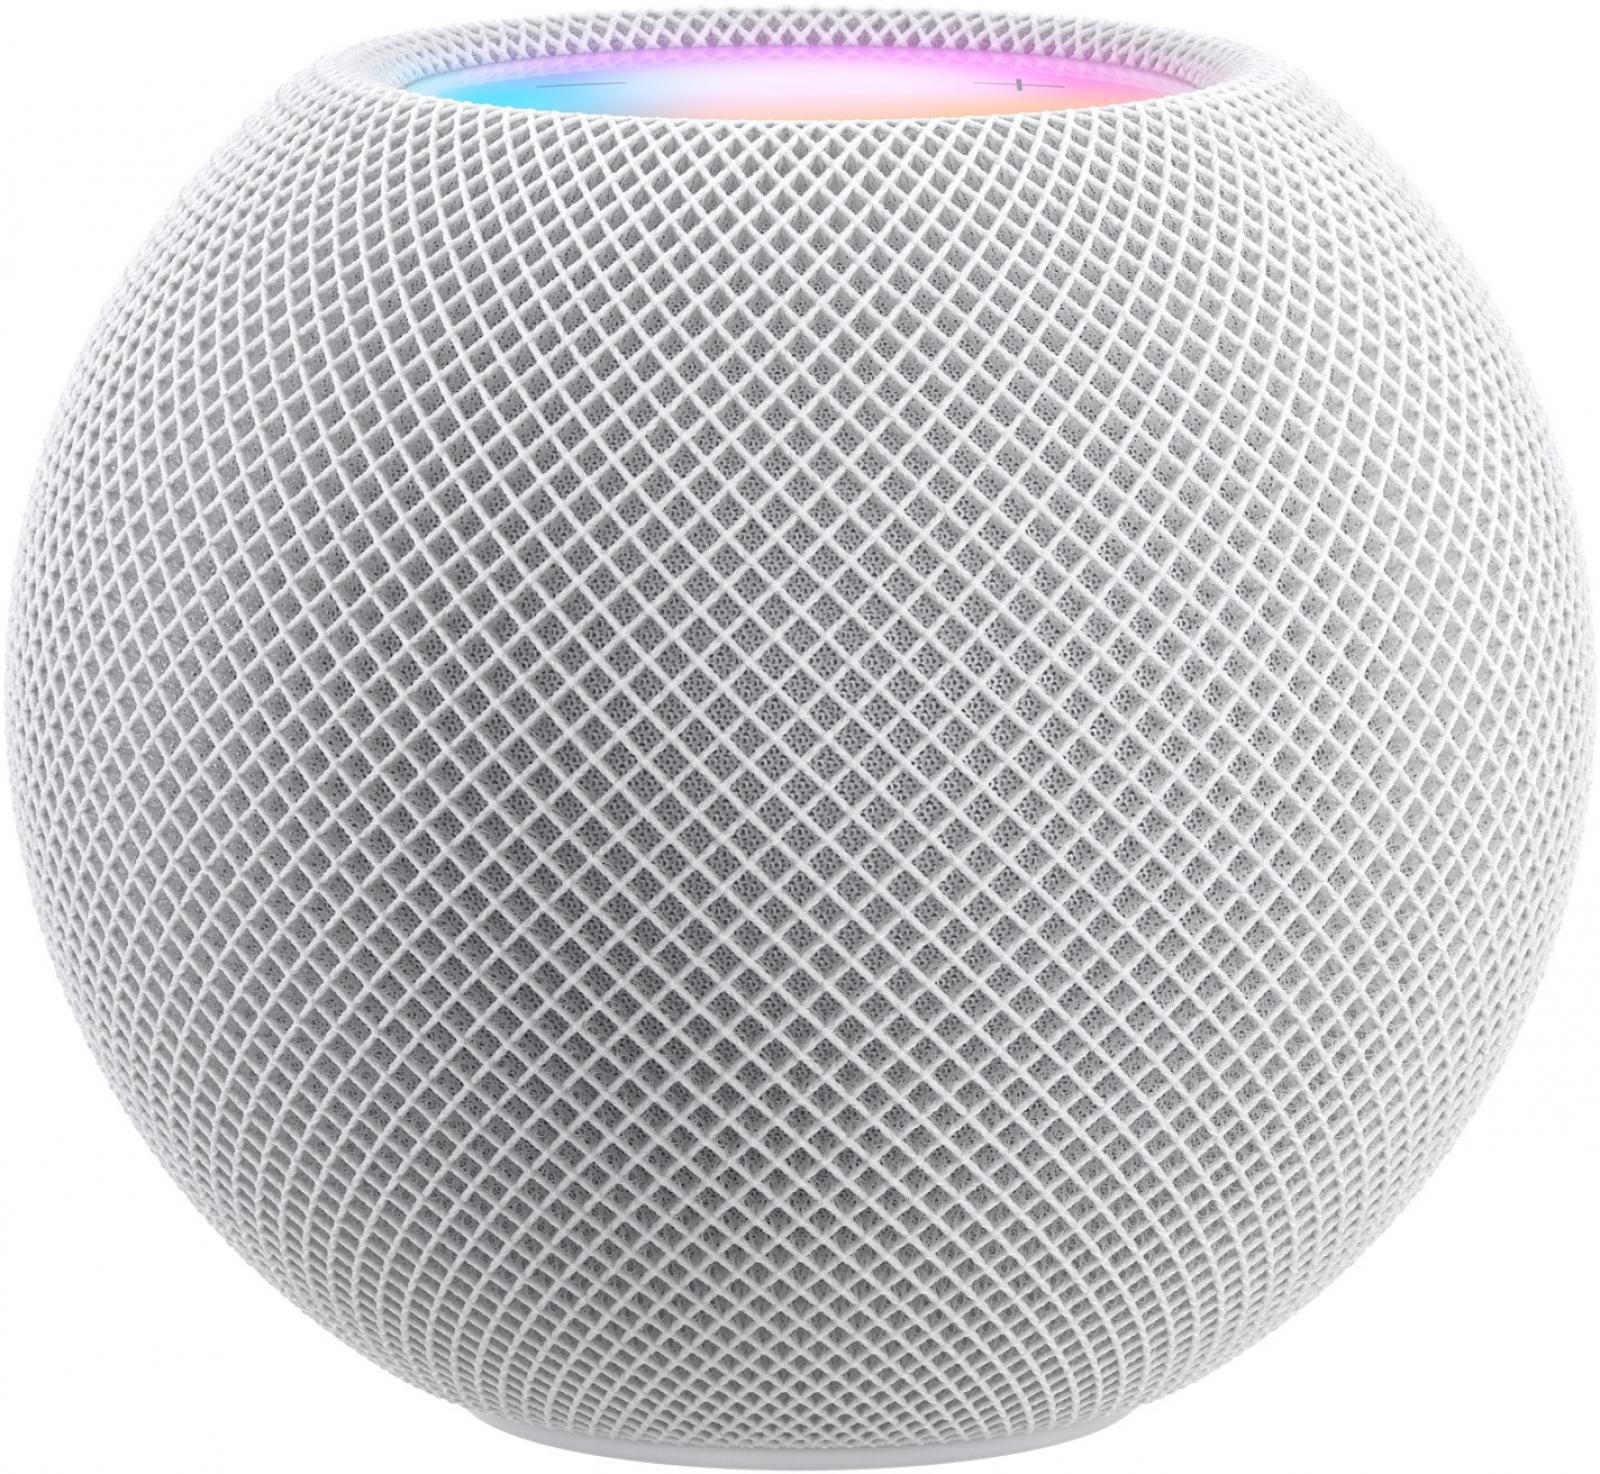 Cover image for HomePod Mini: Apple’s pandemic-era product